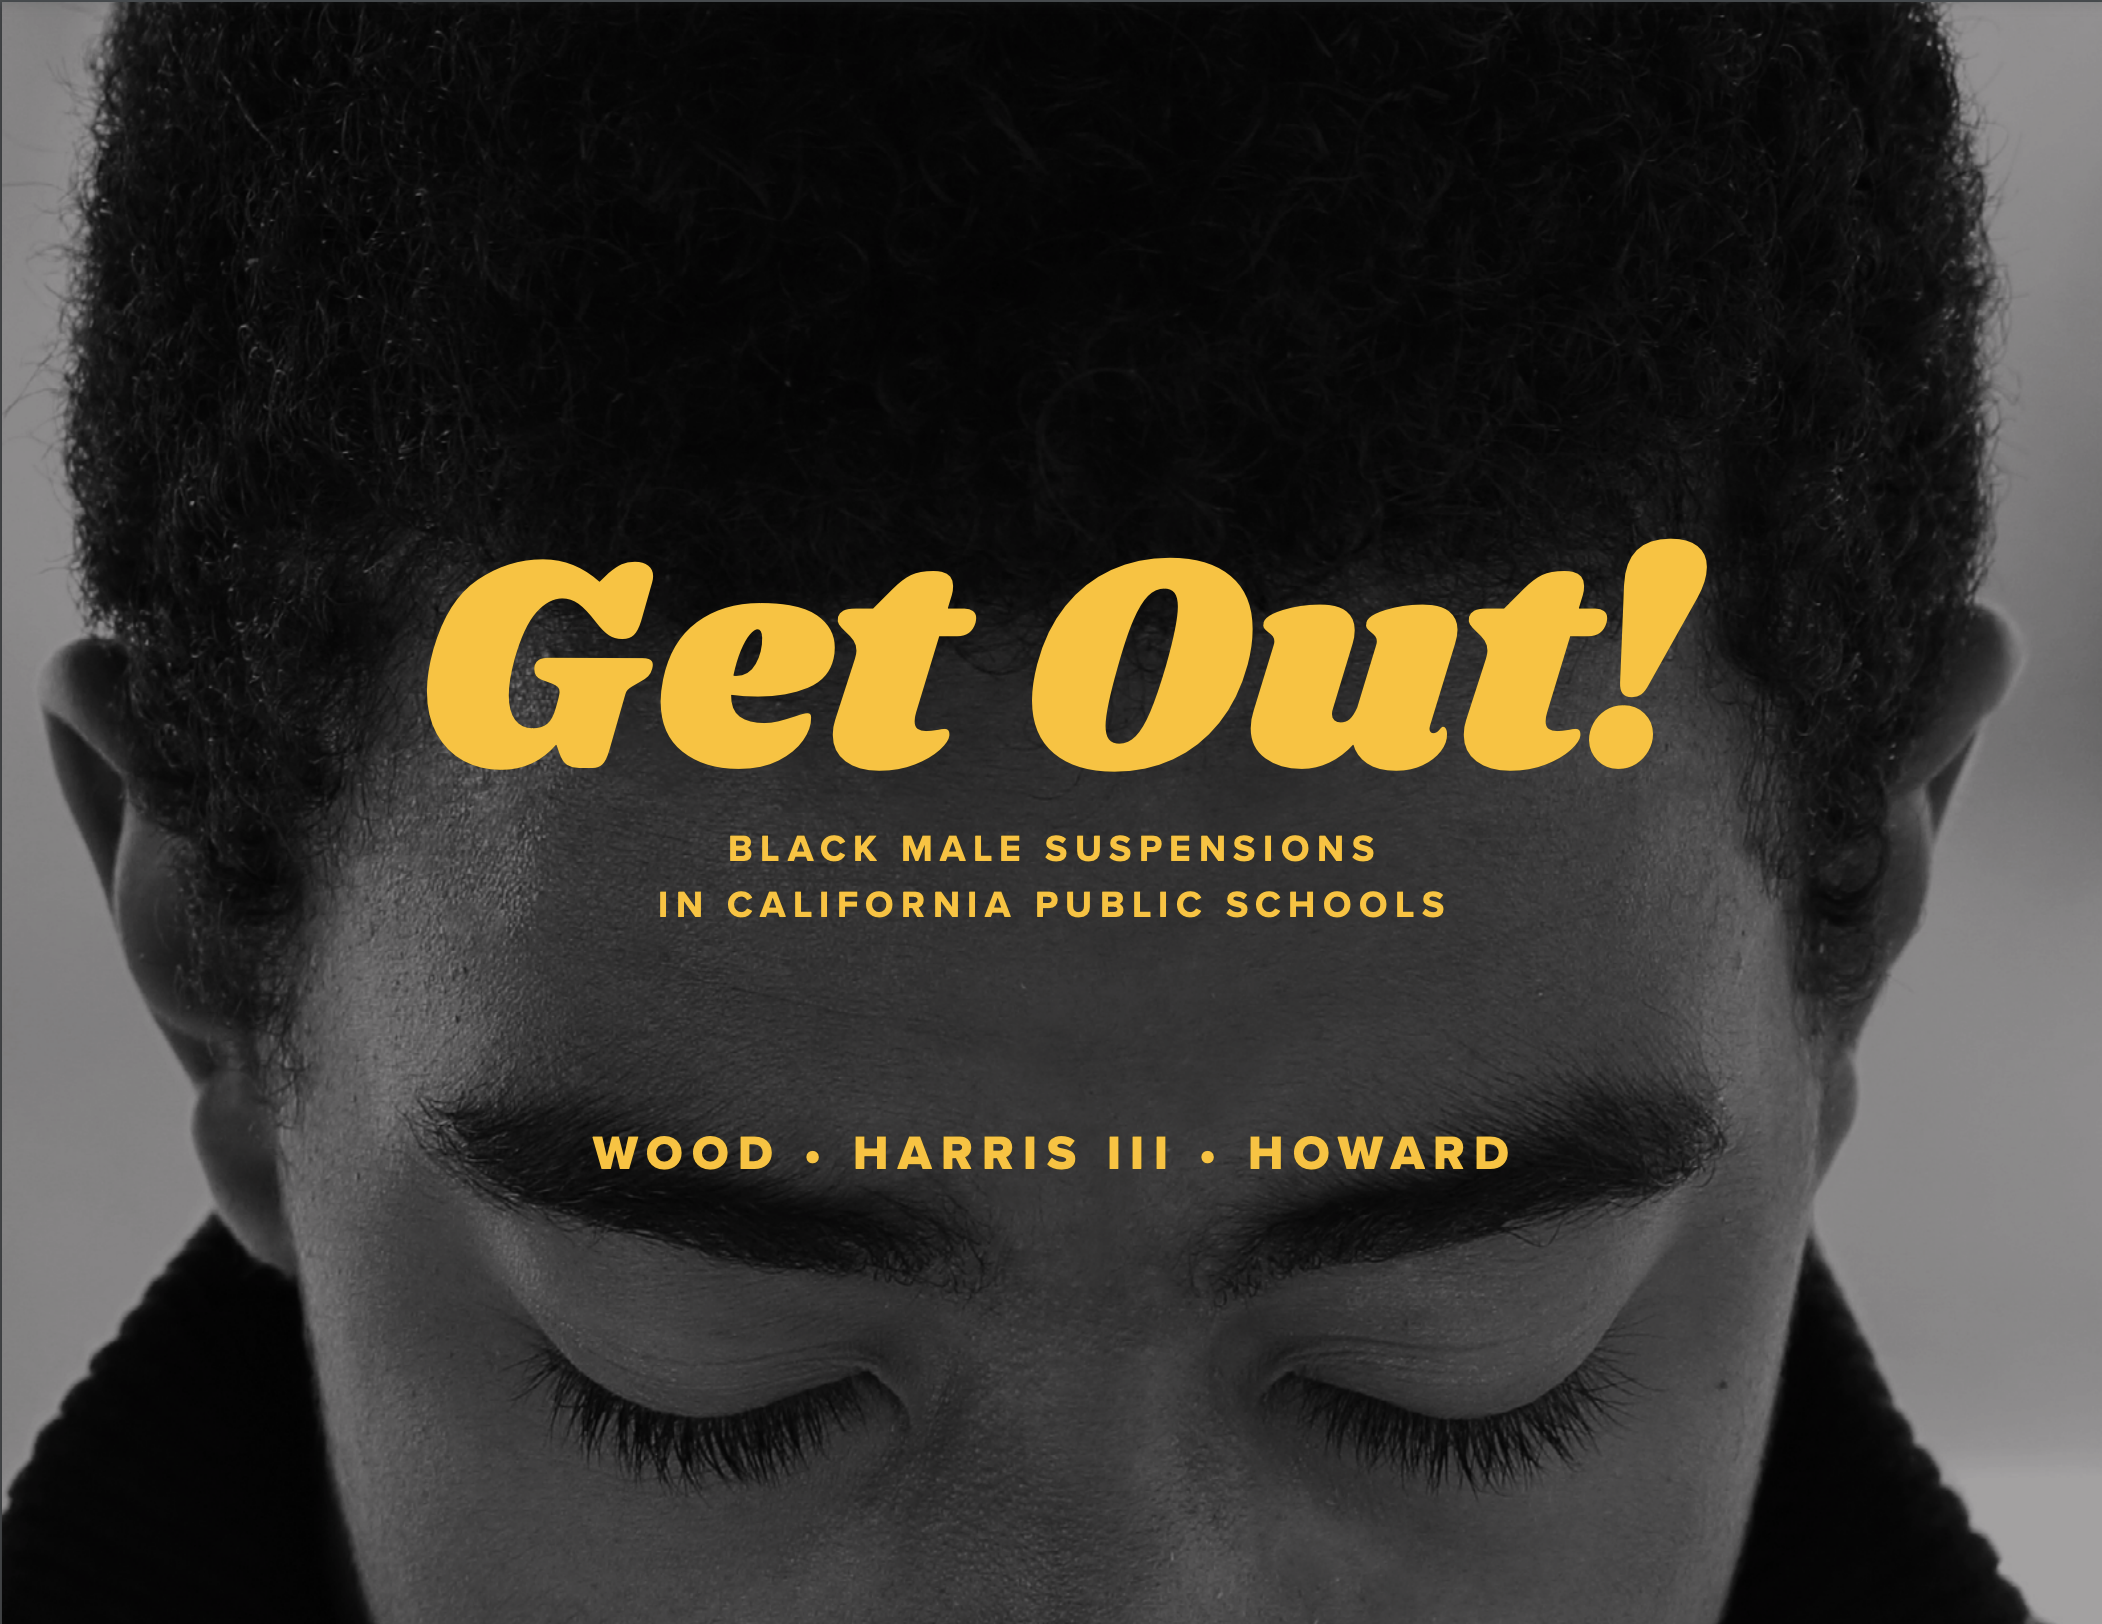 Get Out! Black Male Suspensions